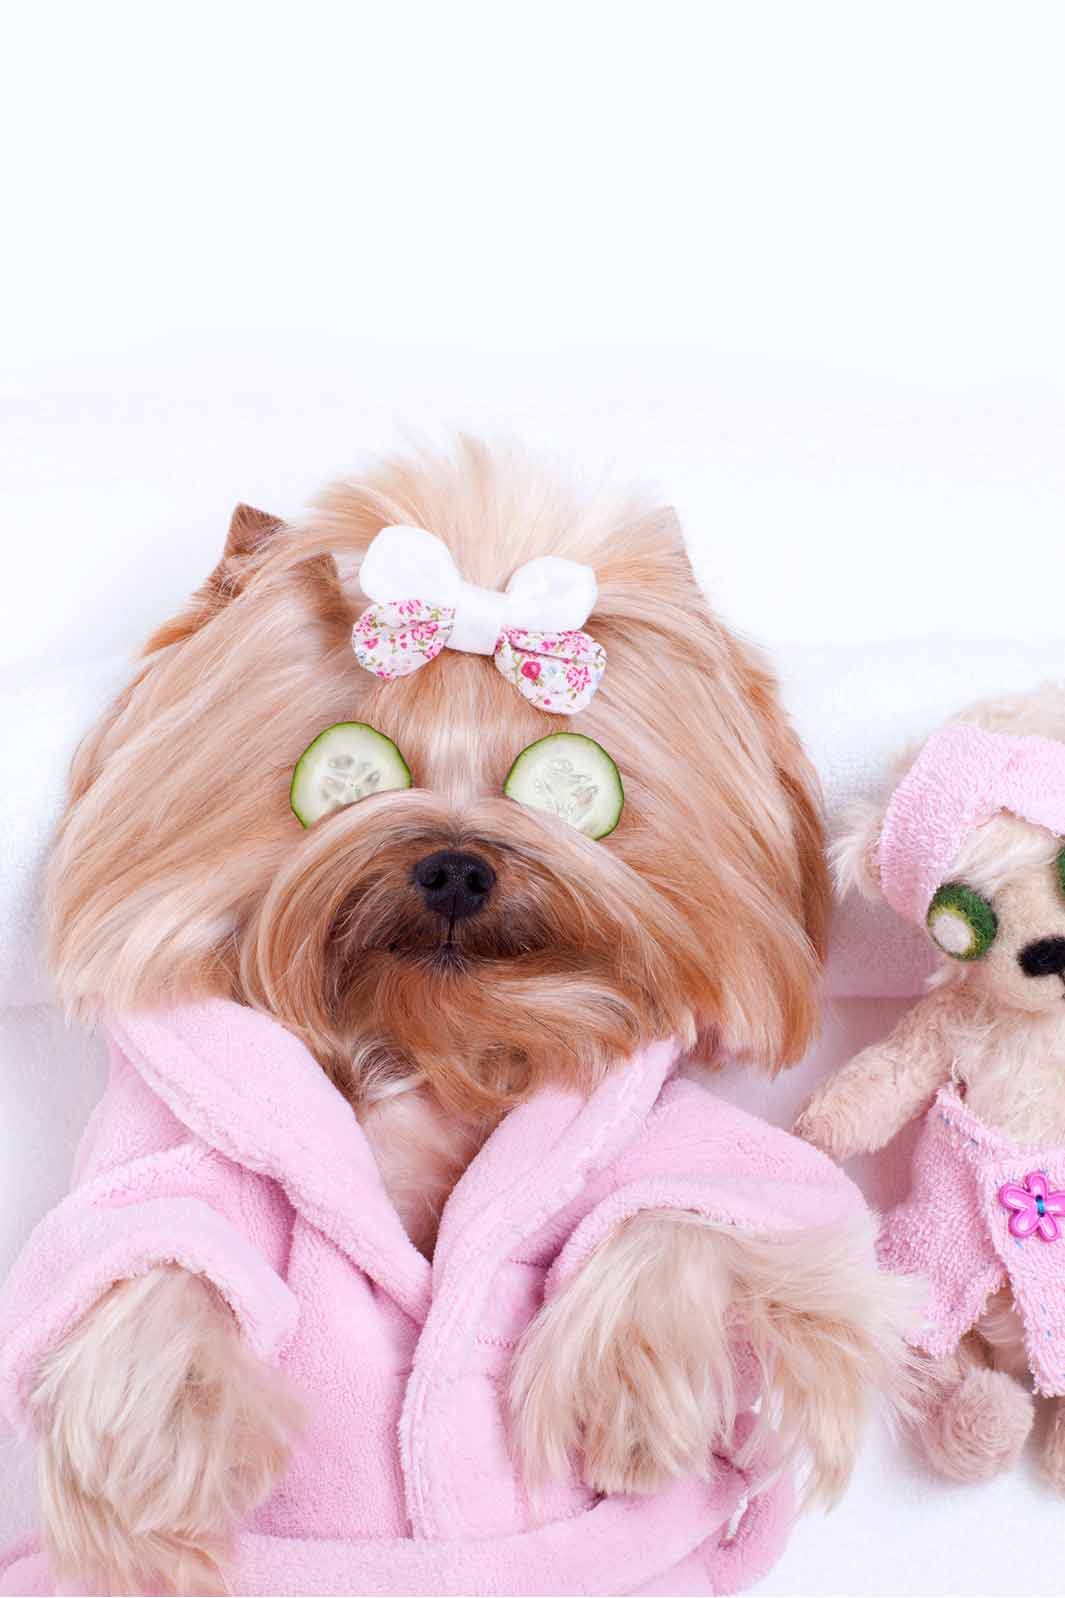 Adorable Yorkshire Terrier wearing a pink bathrobe and getting a massage at the spa